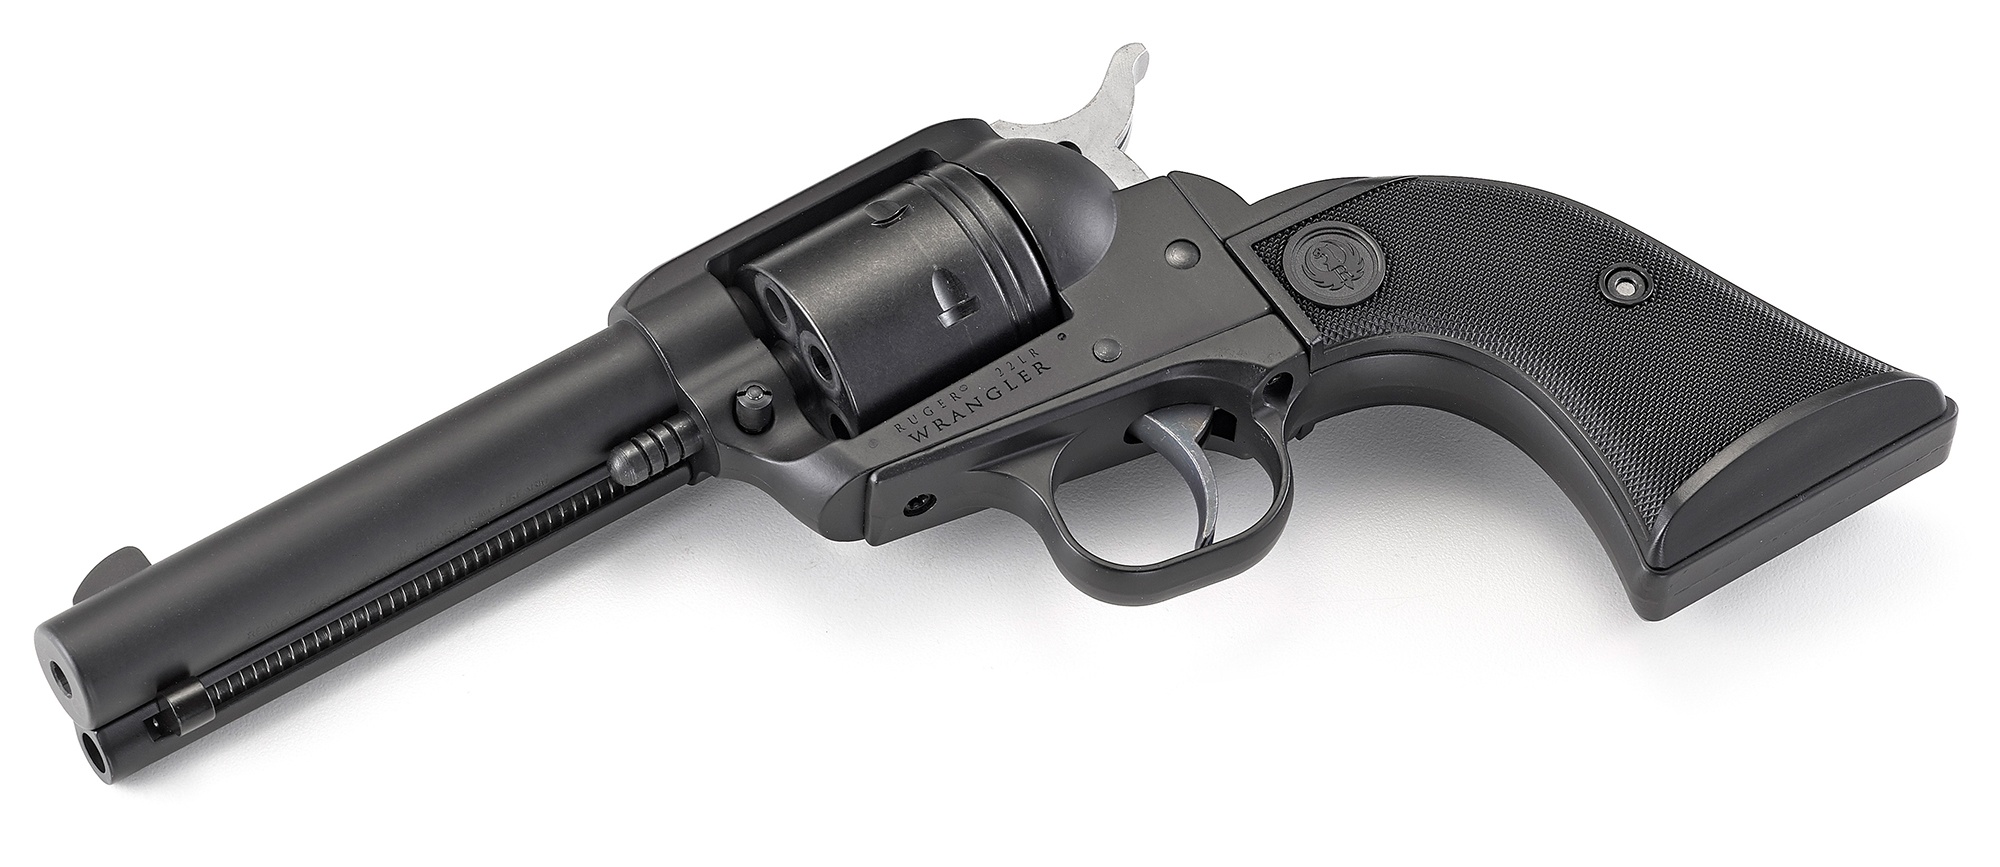 Ruger Releases the Wrangler .22LR Single-Action Revolver | RECOIL